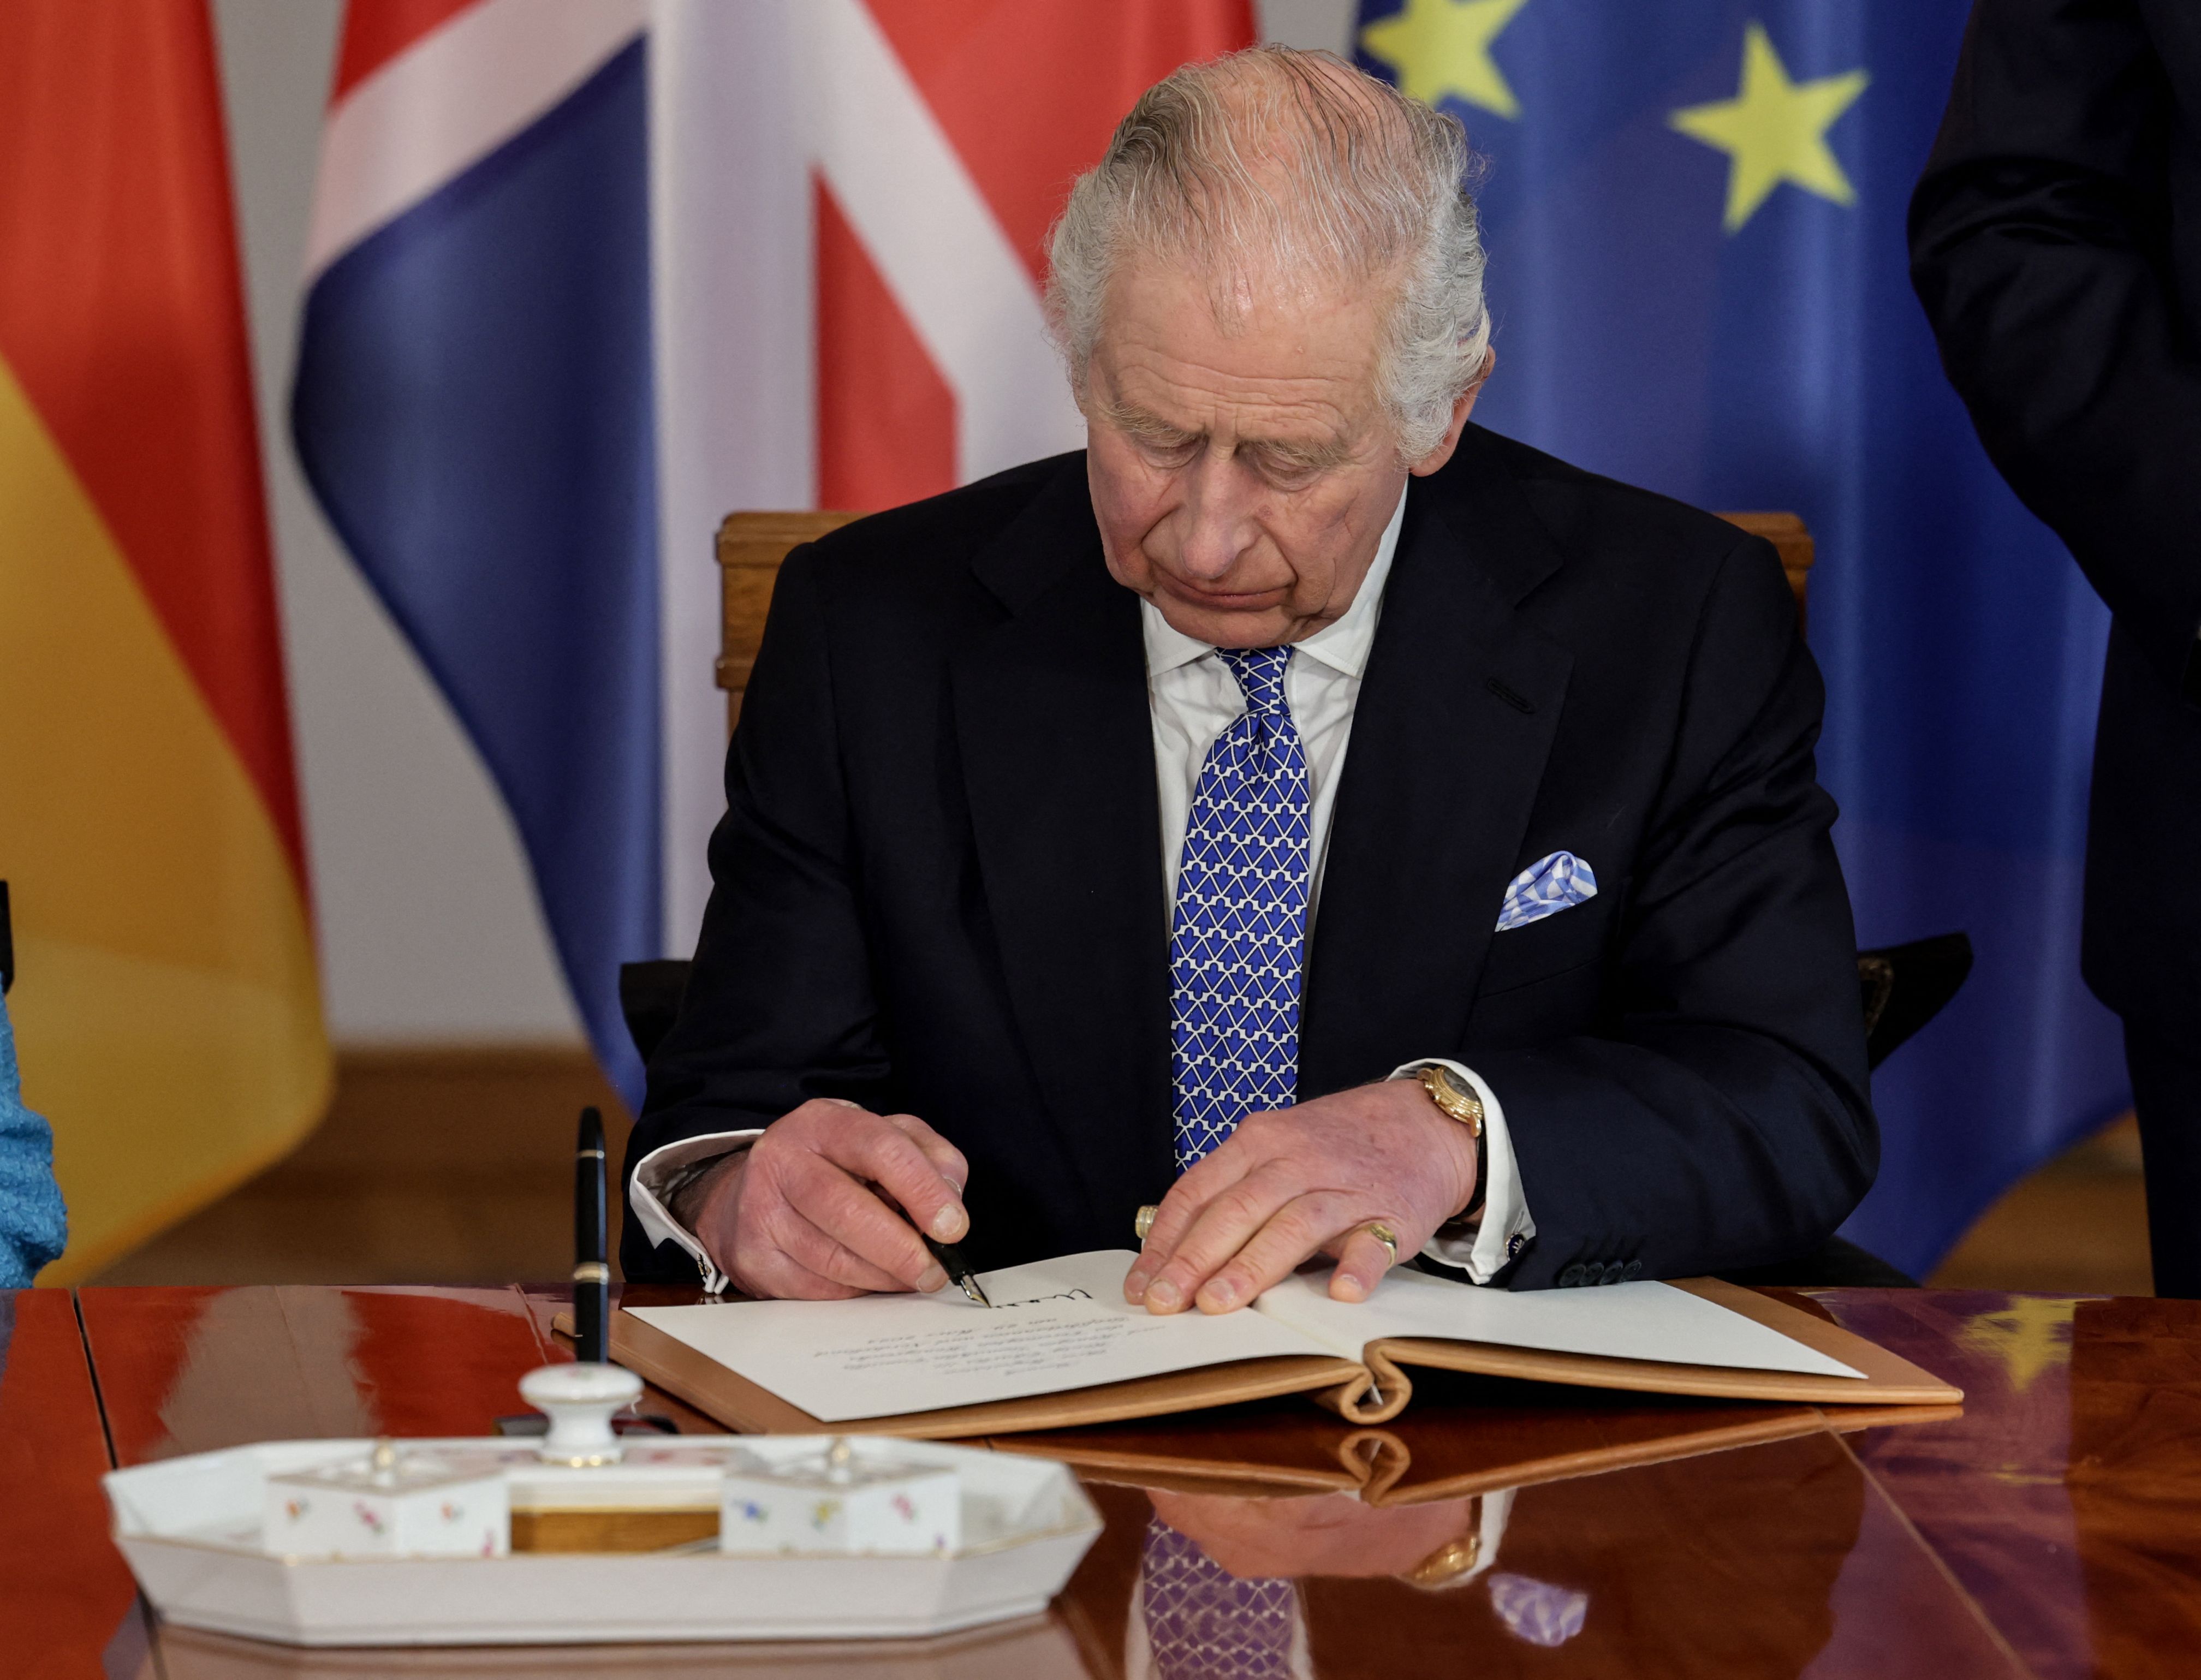 King Charles signs the guest book at the presidential Bellevue Palace in Berlin, on March 29, 2023 | Source: Getty Images